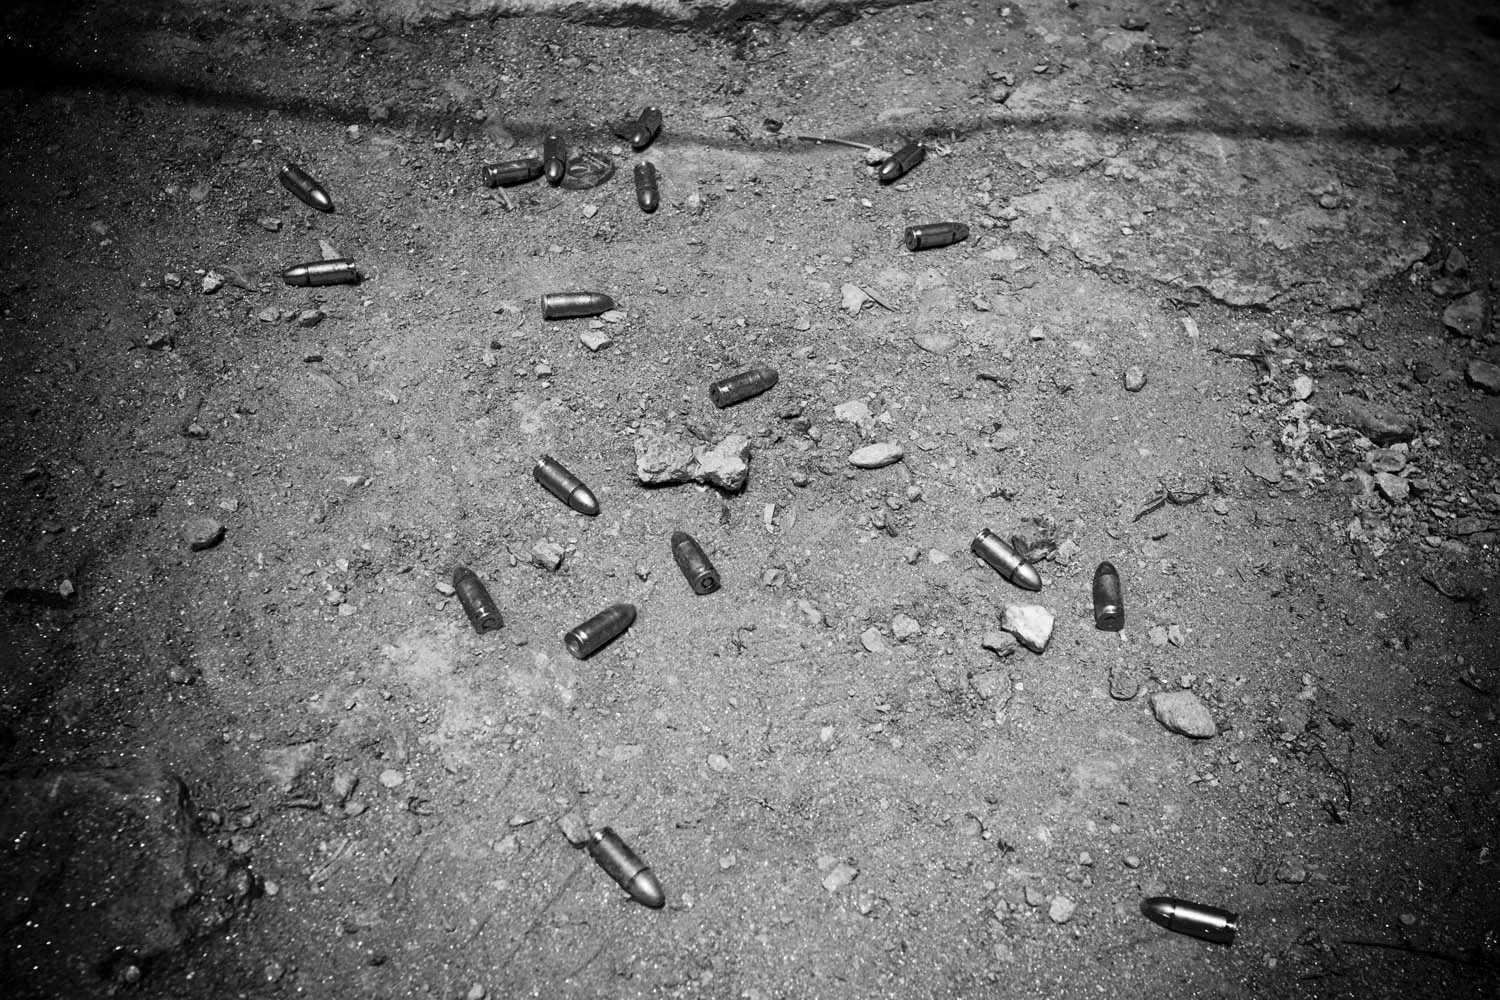 Bullets on the ground. The government estimates that there are more than 6 million weapons currently in the hands of civilians.